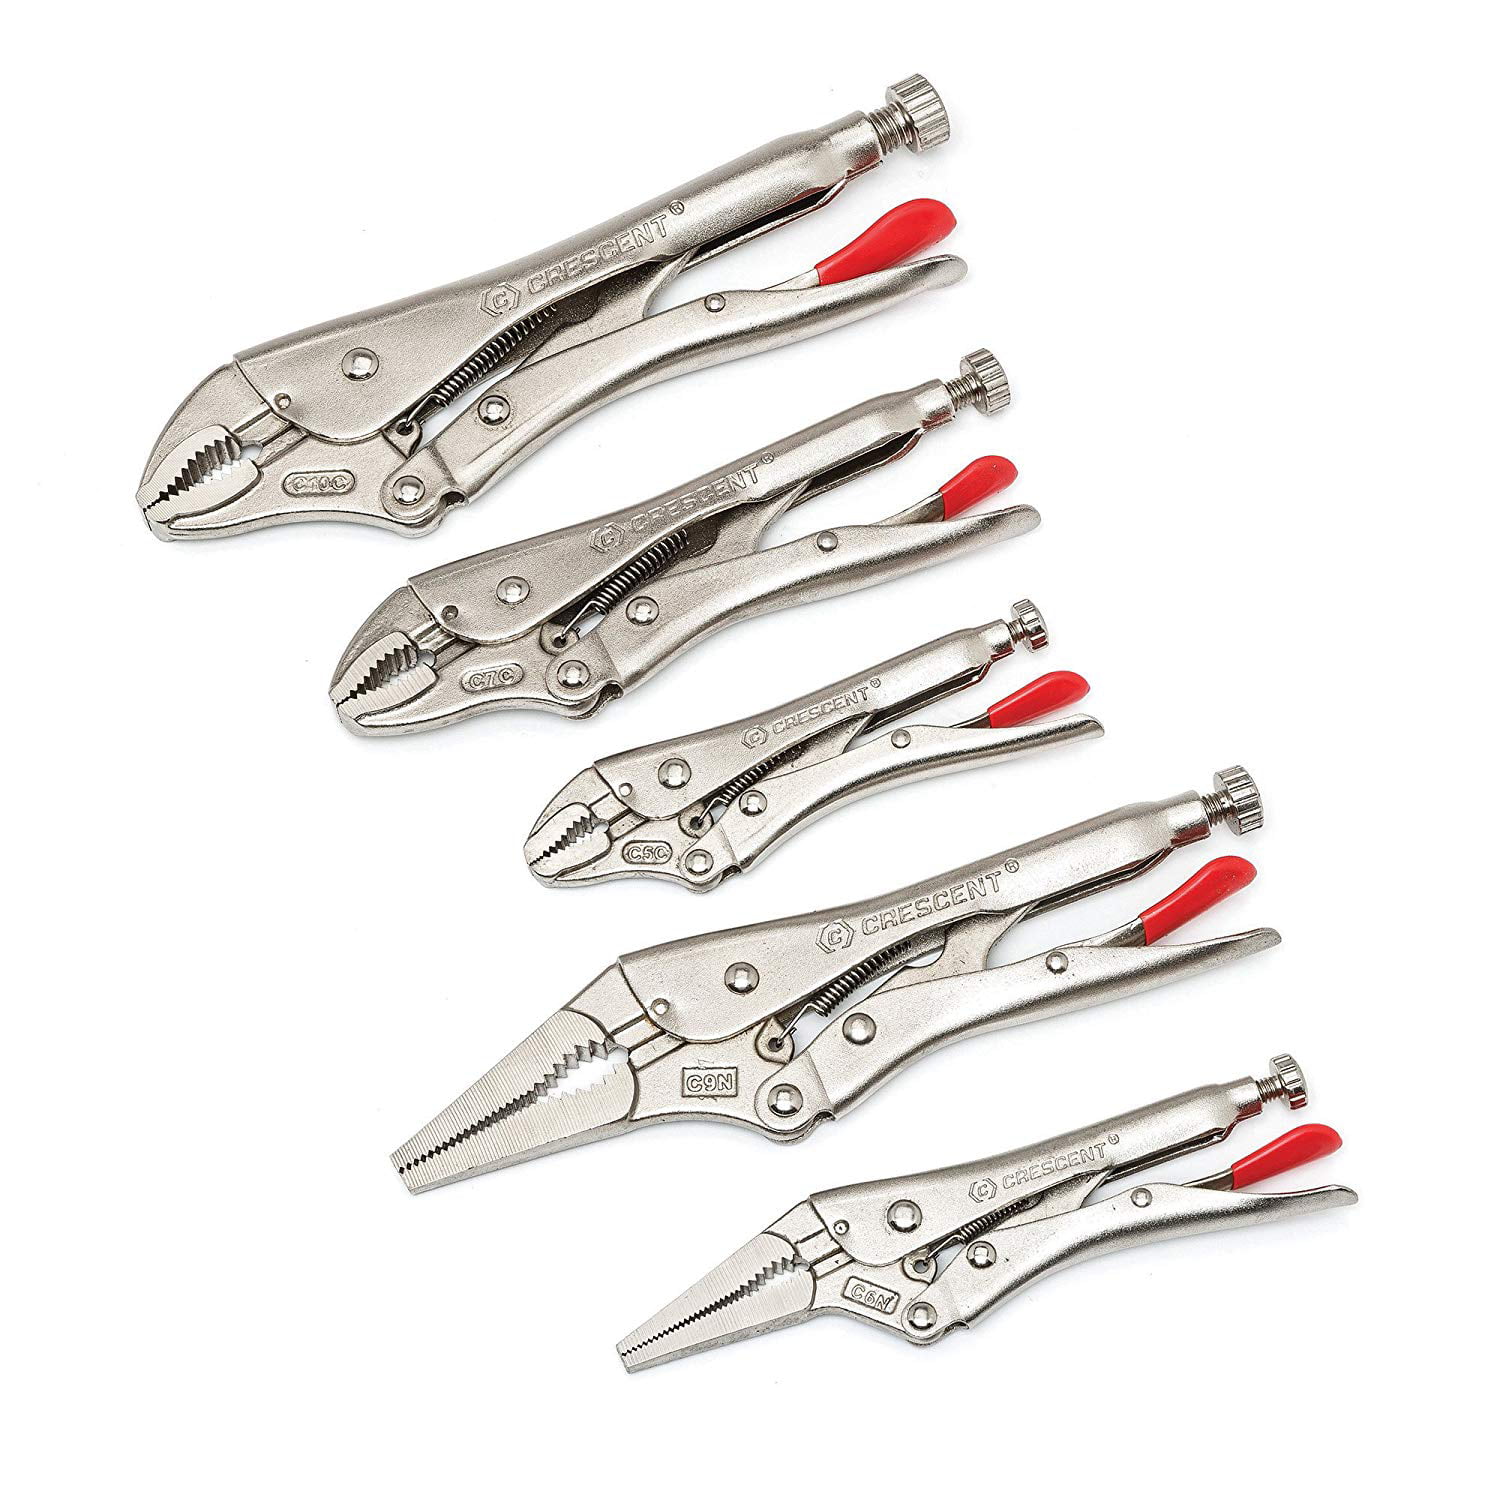 Crescent CLP2SET 7 Inch And 10 Inch Curved Jaw Locking Plier Set: Locking  Pliers (037103350374-1)